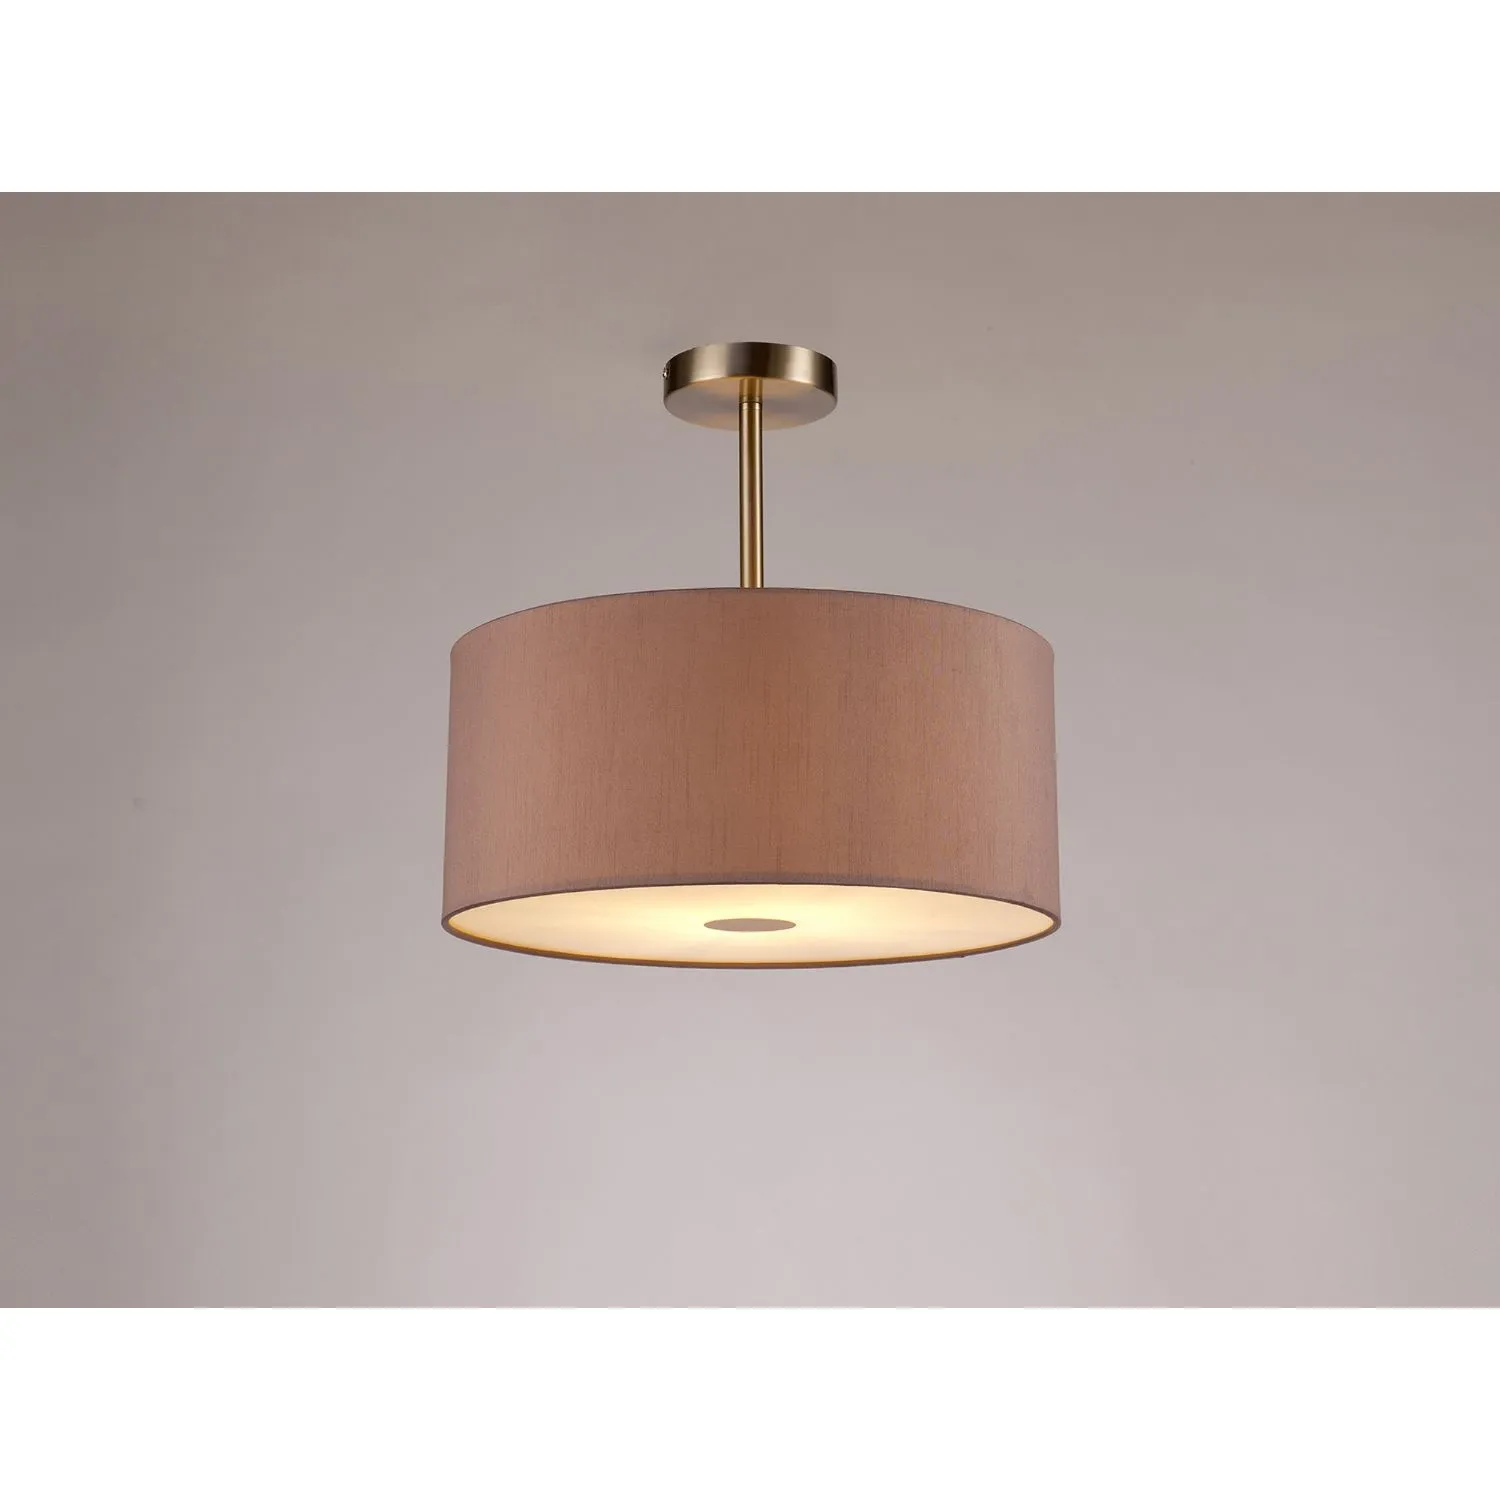 Baymont Satin Nickel 1 Light E27 Semi Flush c w 400mm Dual Faux Silk Shade, Taupe Halo Gold c w 400mm Frosted SN Acrylic Diffuser